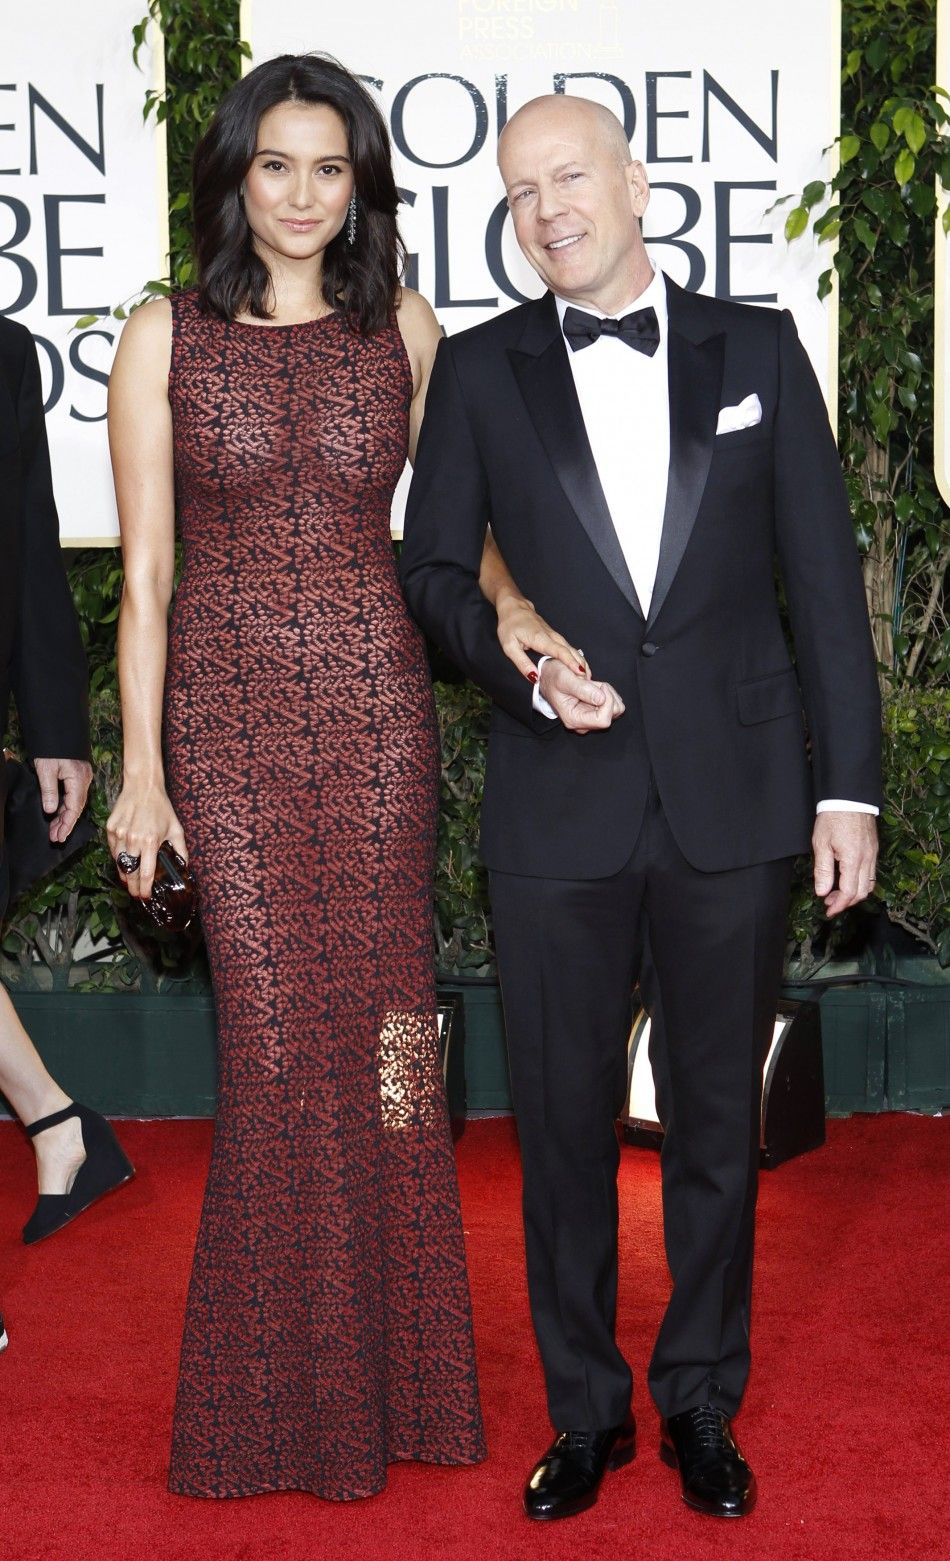 Actor Bruce Willis and his wife Emma Heming arrive at the 68th annual Golden Globe Awards in Beverly Hills, California, January 16, 2011.